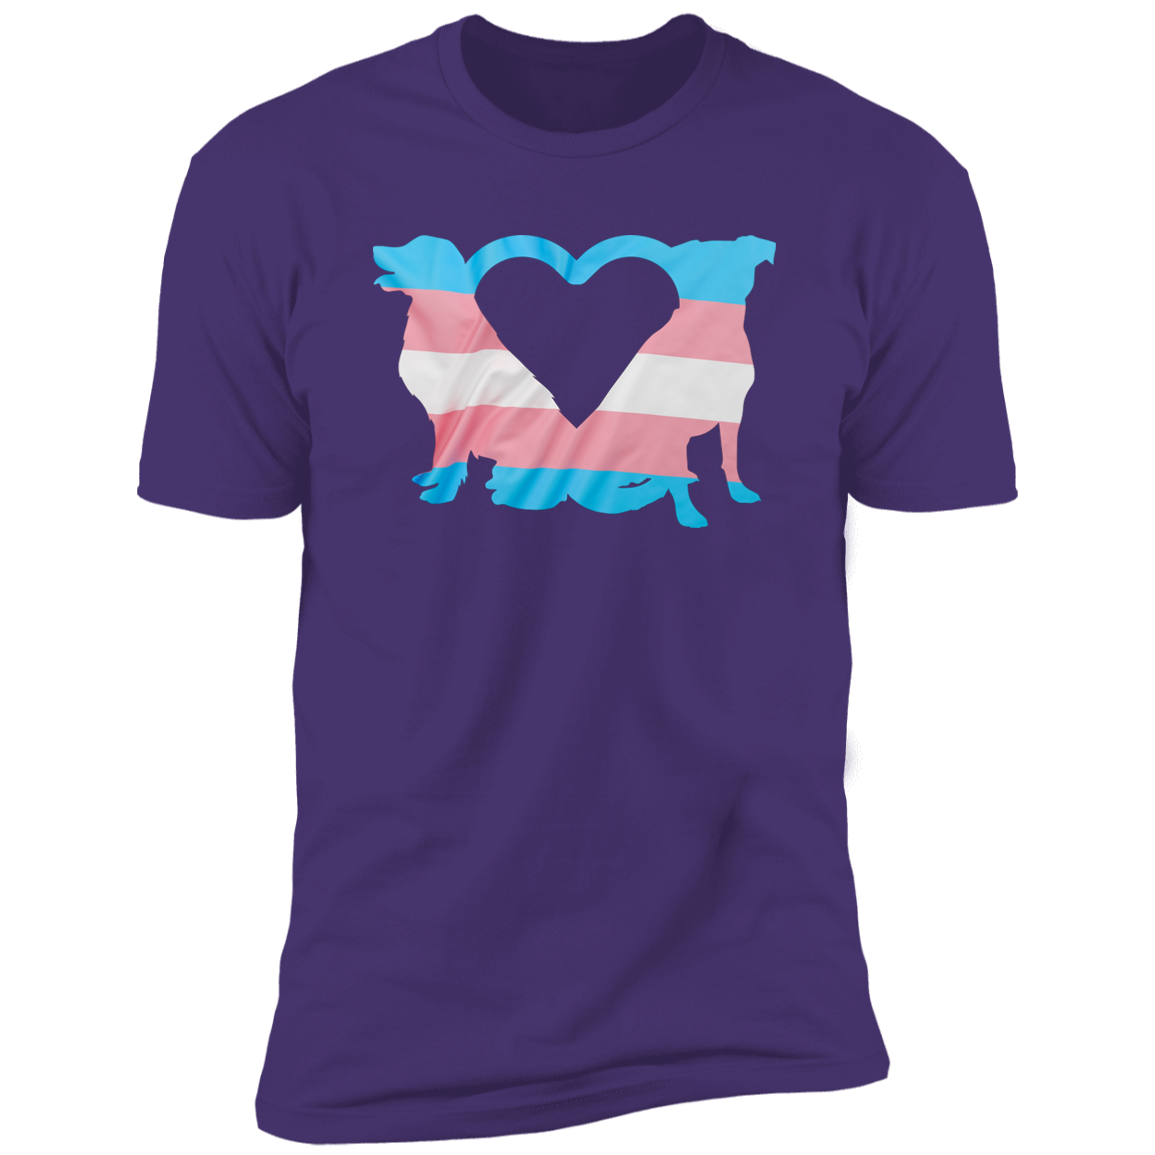 Trans Pride Dogs Heart Pride T-shirt, Trans Pride Dog Shirt for humans, in purple rush